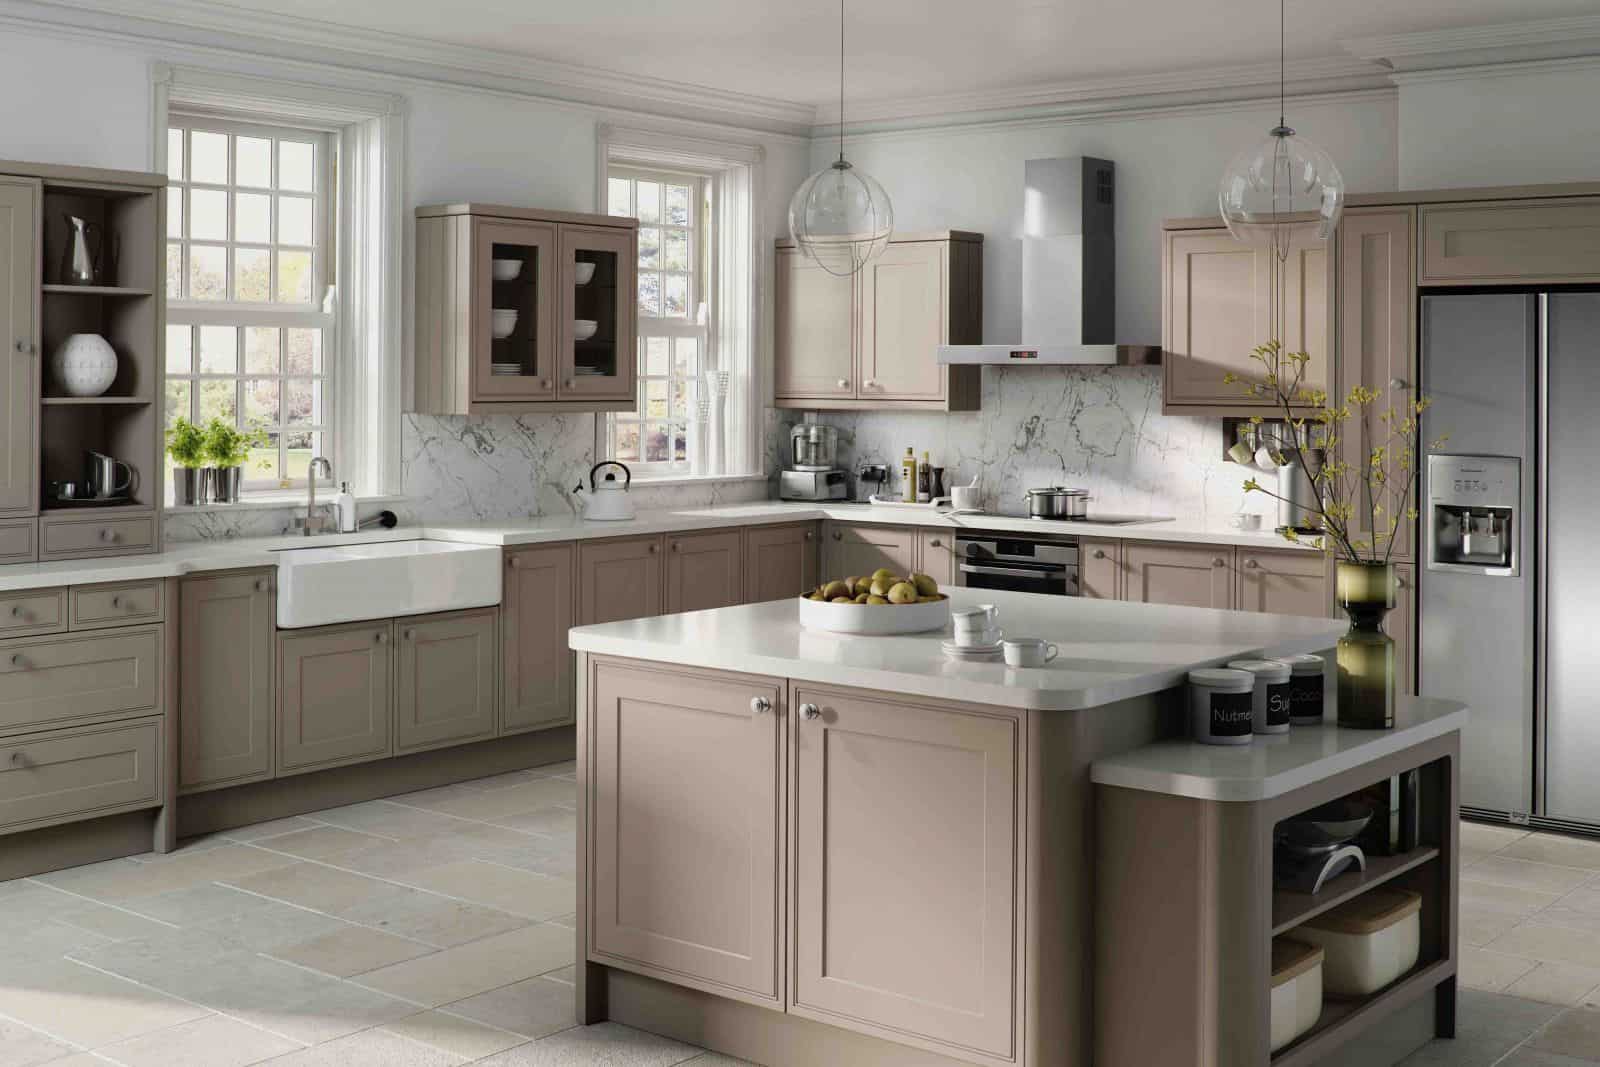 Top Taupe Paints For Your Kitchen Cabinets, What Color Paint Goes With Taupe Kitchen Cabinets